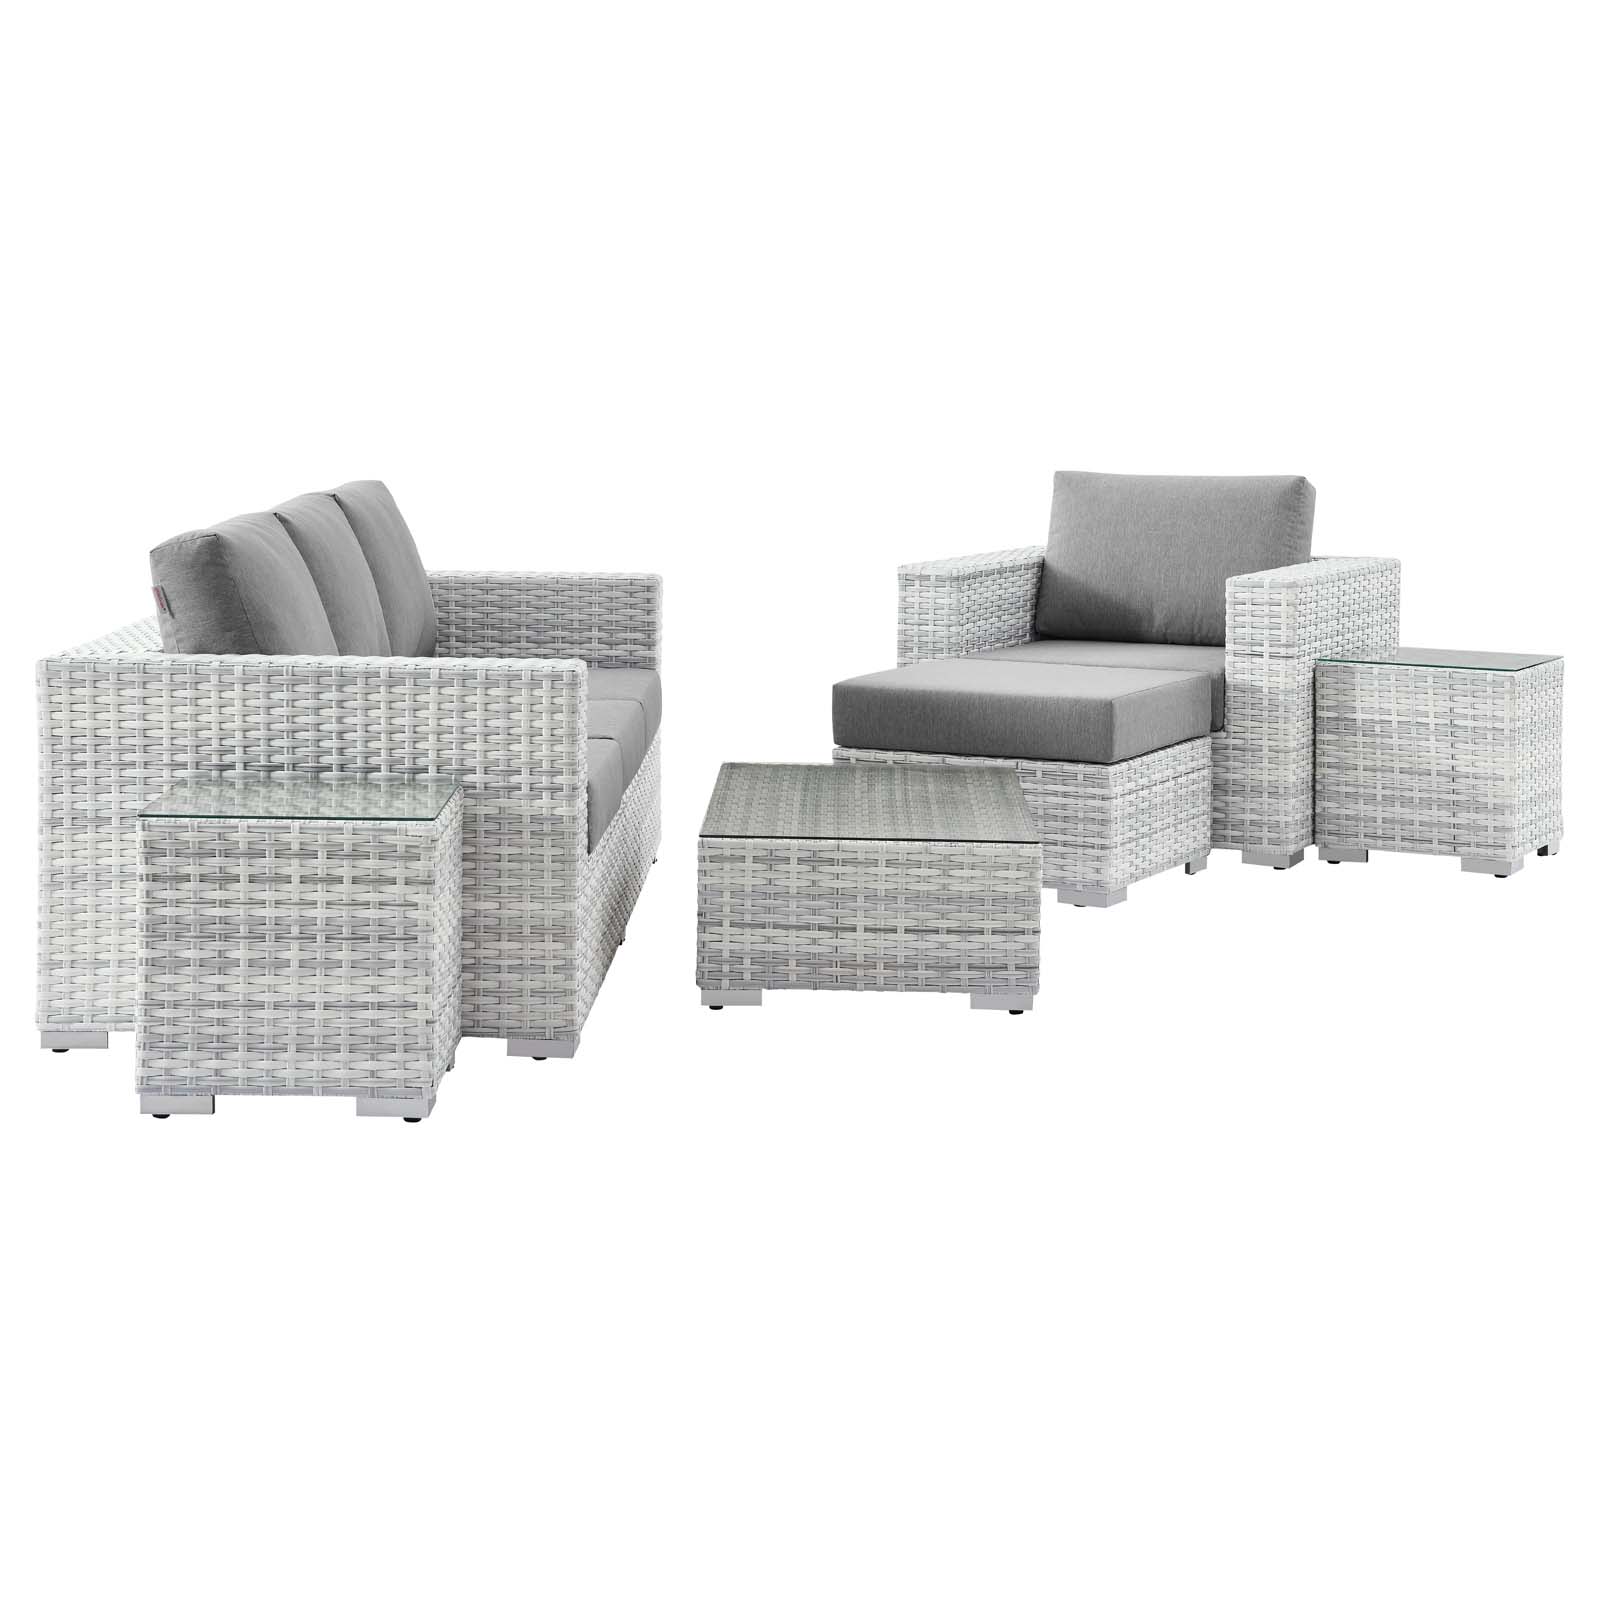 Lounge Sectional Sofa Chair Set, Rattan, Wicker, Grey Gray, Modern Contemporary Urban Design, Outdoor Patio Balcony Cafe Bistro Garden Furniture Hotel Hospitality - image 3 of 10